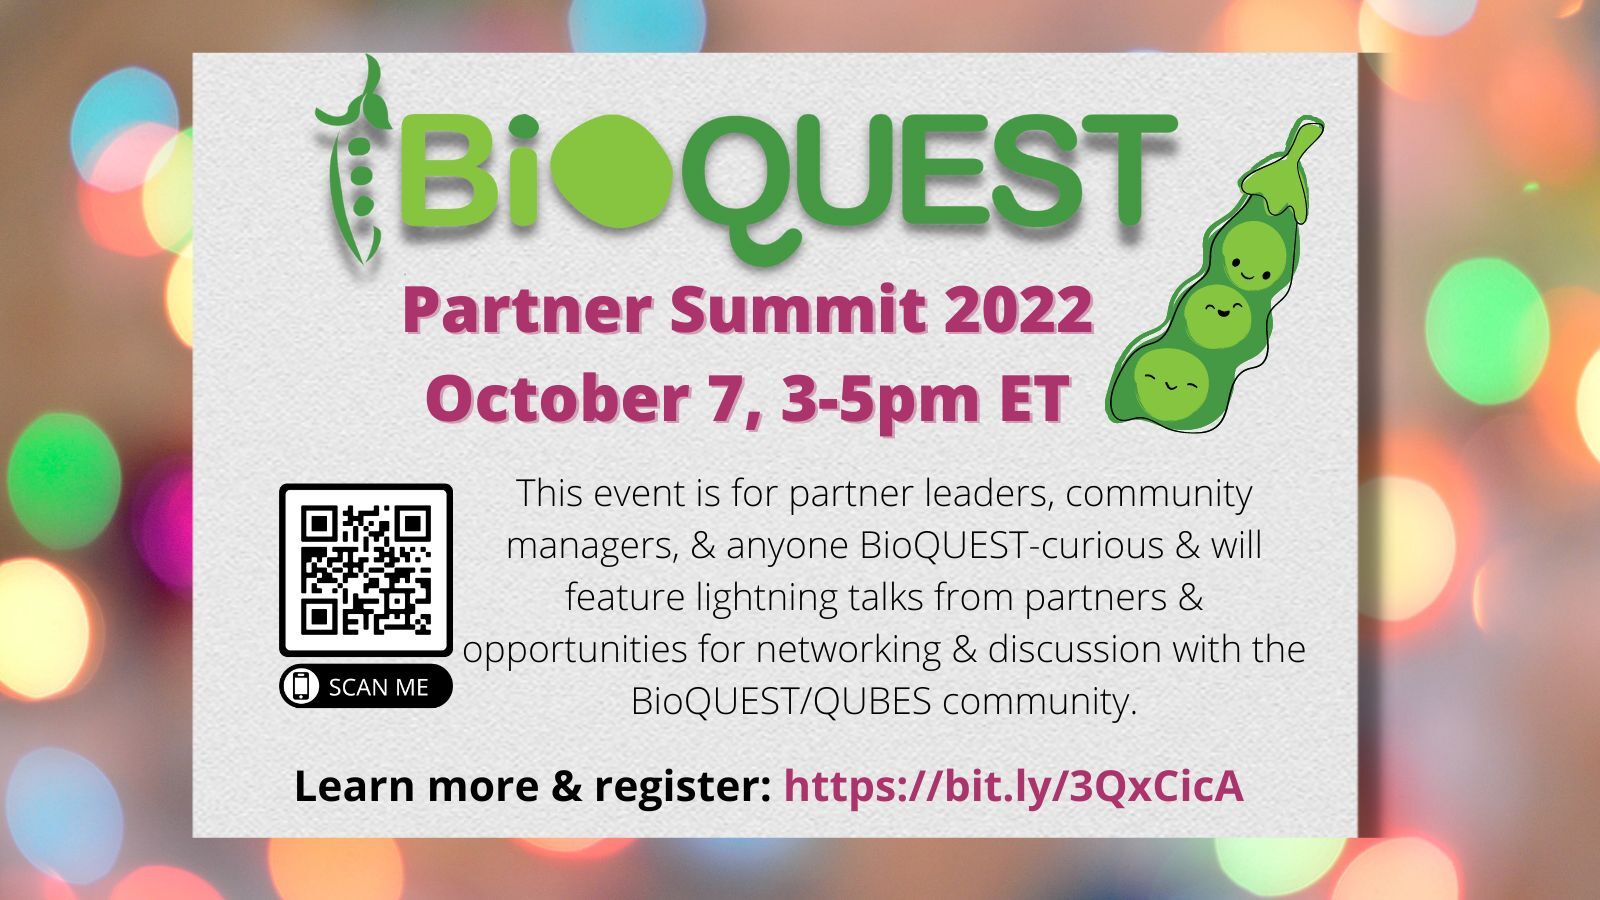 BioQUEST Partner Summit 2022, Oct. 7 3-5 PM ET This event is for partner leaders, community managers, and anyone BioQUEST-curious and will feature lightning talks from partners and opportunities for networking and discussion with the BQ/QUBES community. Learn more and register :  https://qubeshub.org/community/groups/partnerprojectsupport/activities/summit2022